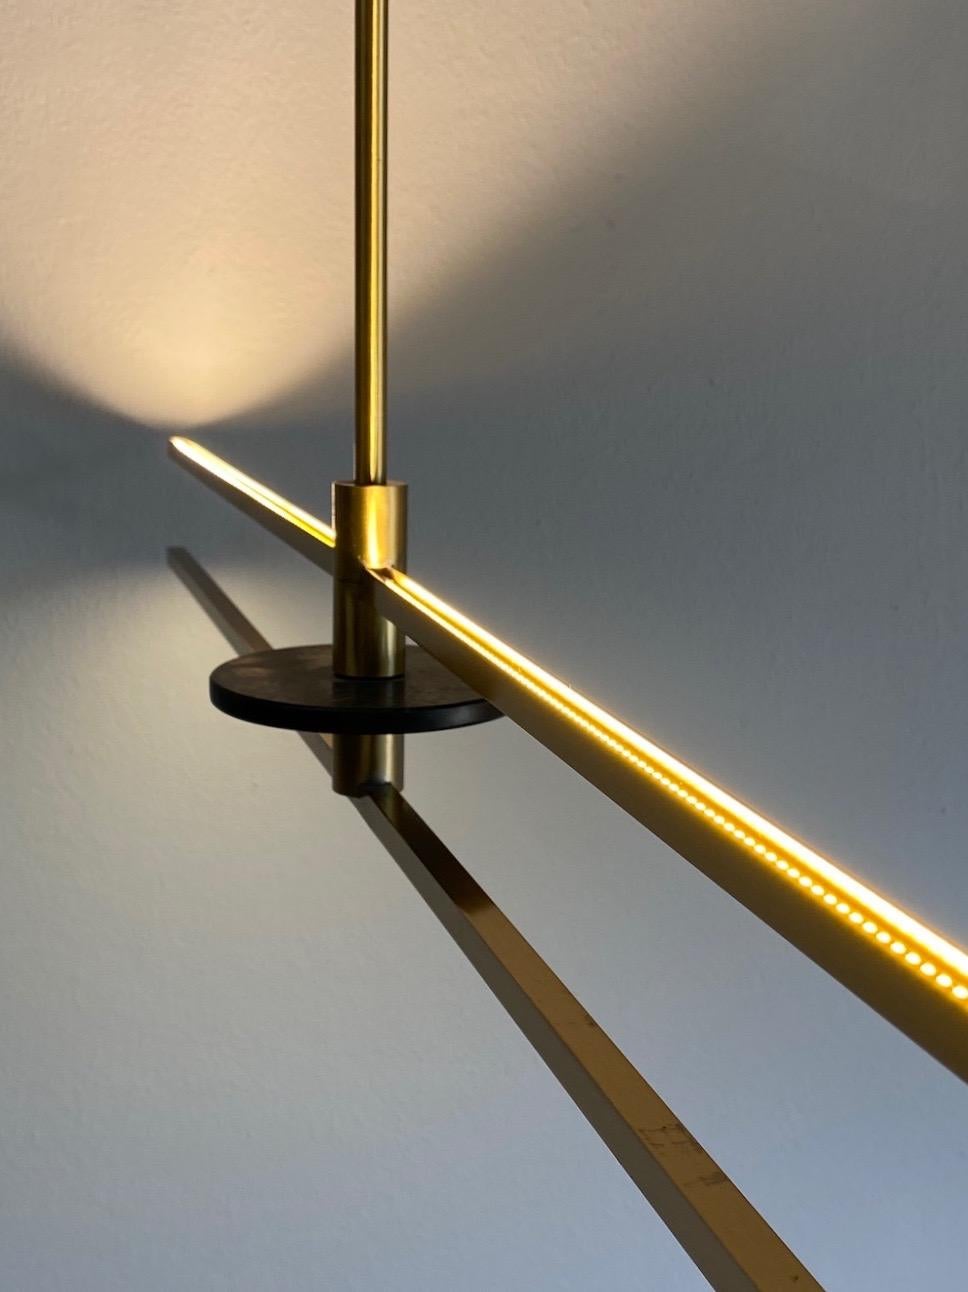 Cosulich Interiors in collaboration with Matlight Studio: this contemporary organic modern lighting, entirely handcrafted in Italy, is part of a collection called essential stick, the core and canopy are here decorated with Nero Marquina marble